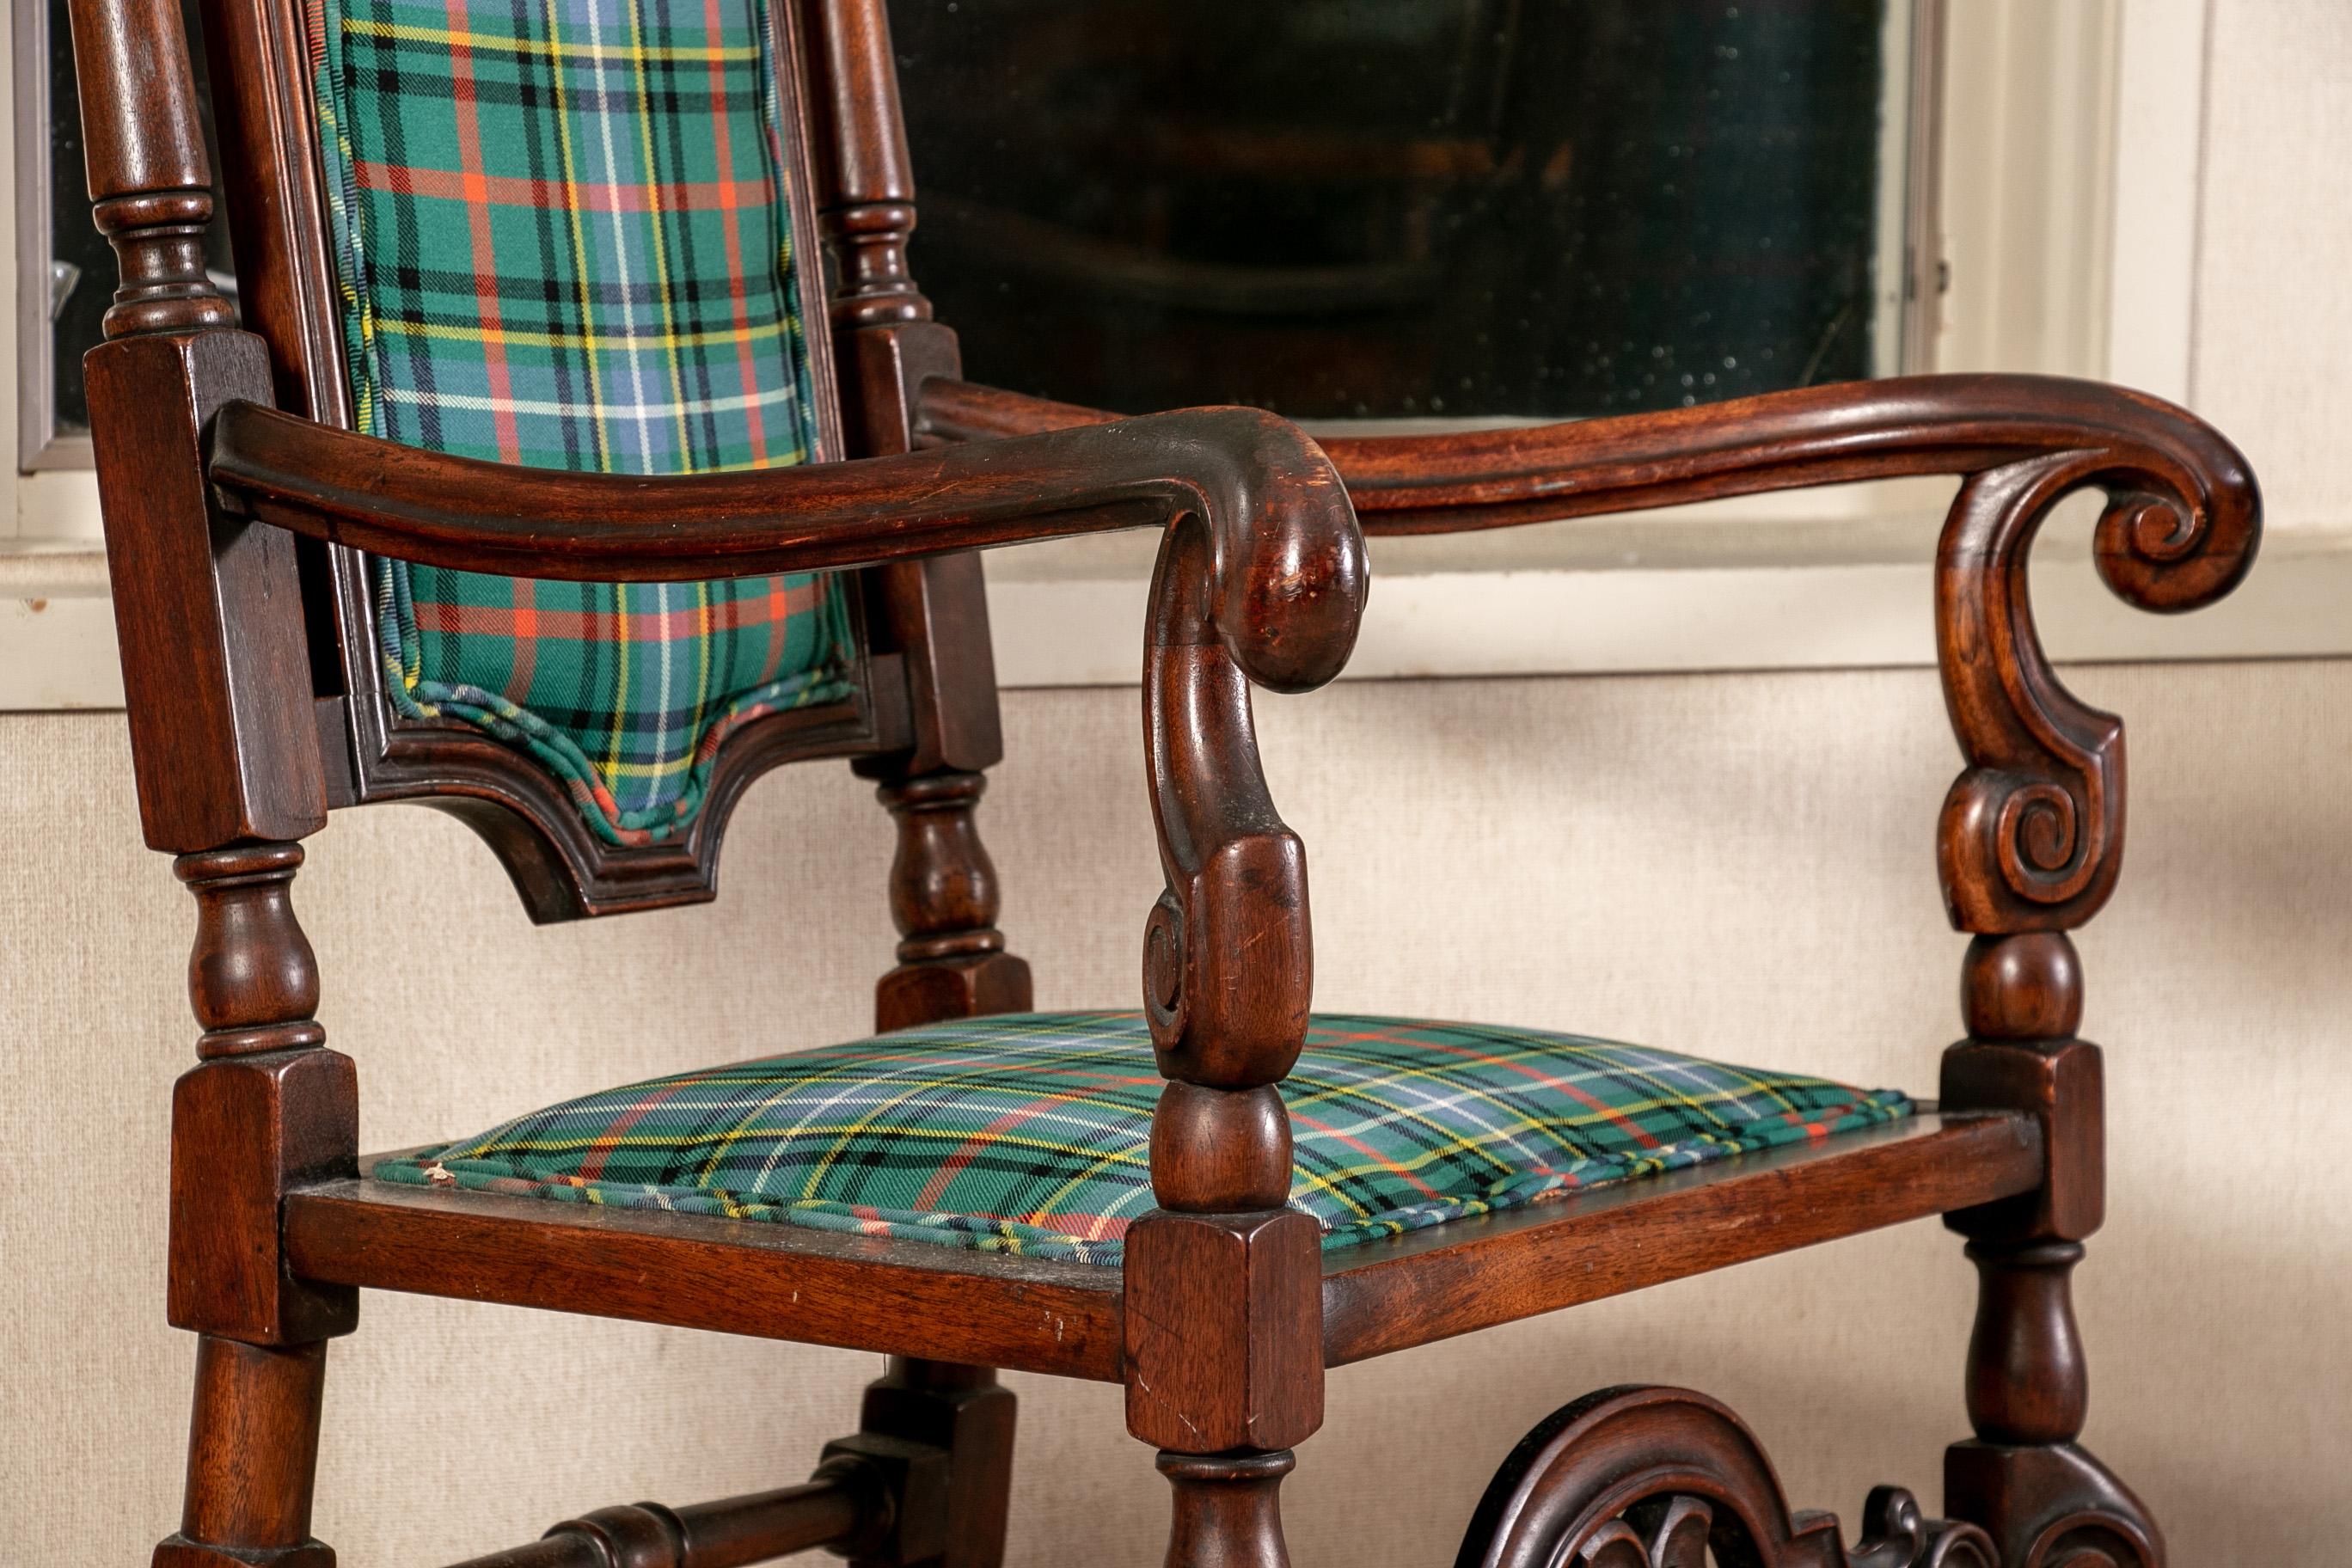 Rustic Pair of Antique English Carved Hall Chairs in a Tartan Plaid